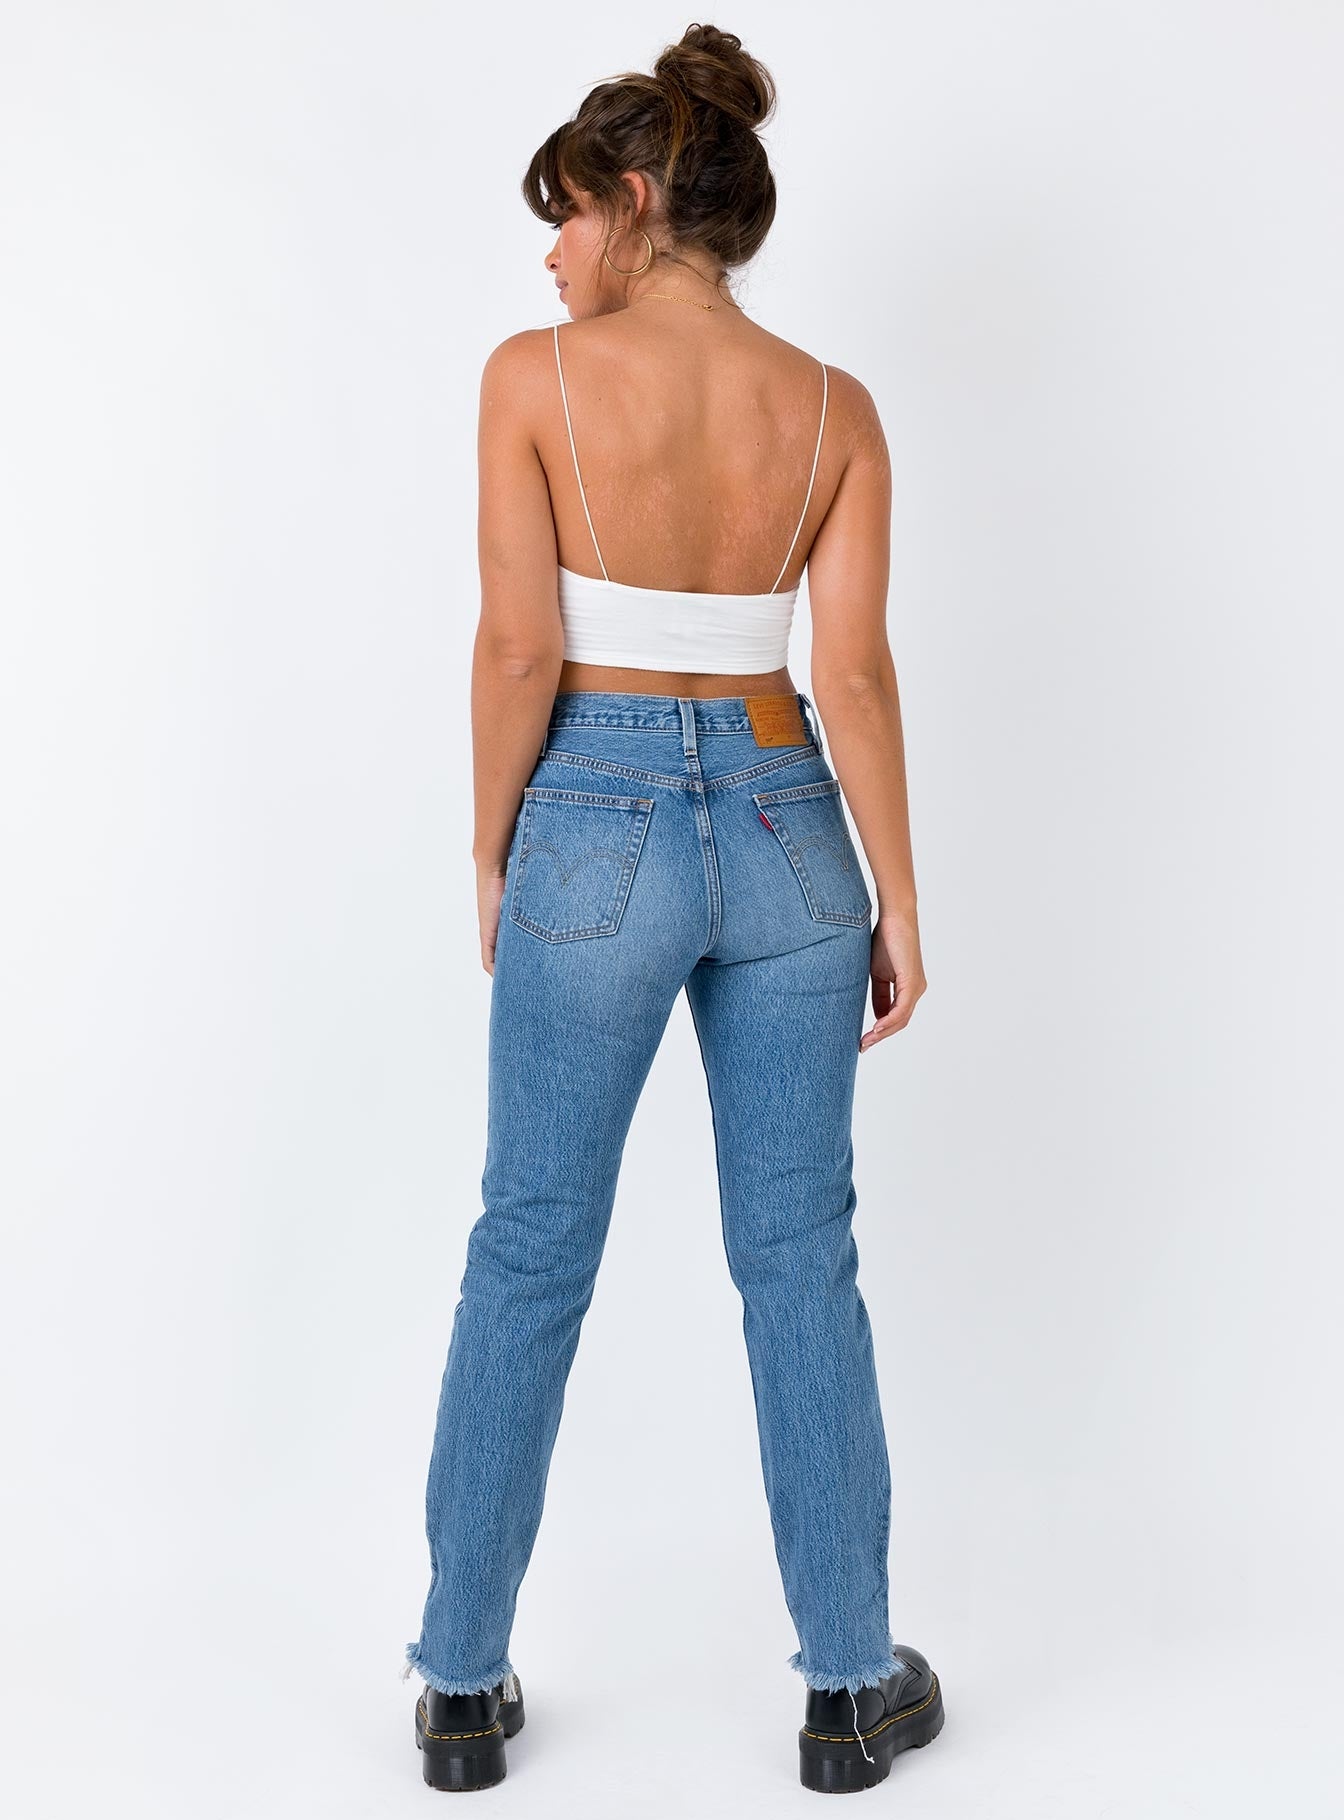 levis truth unfolds 501 jeans